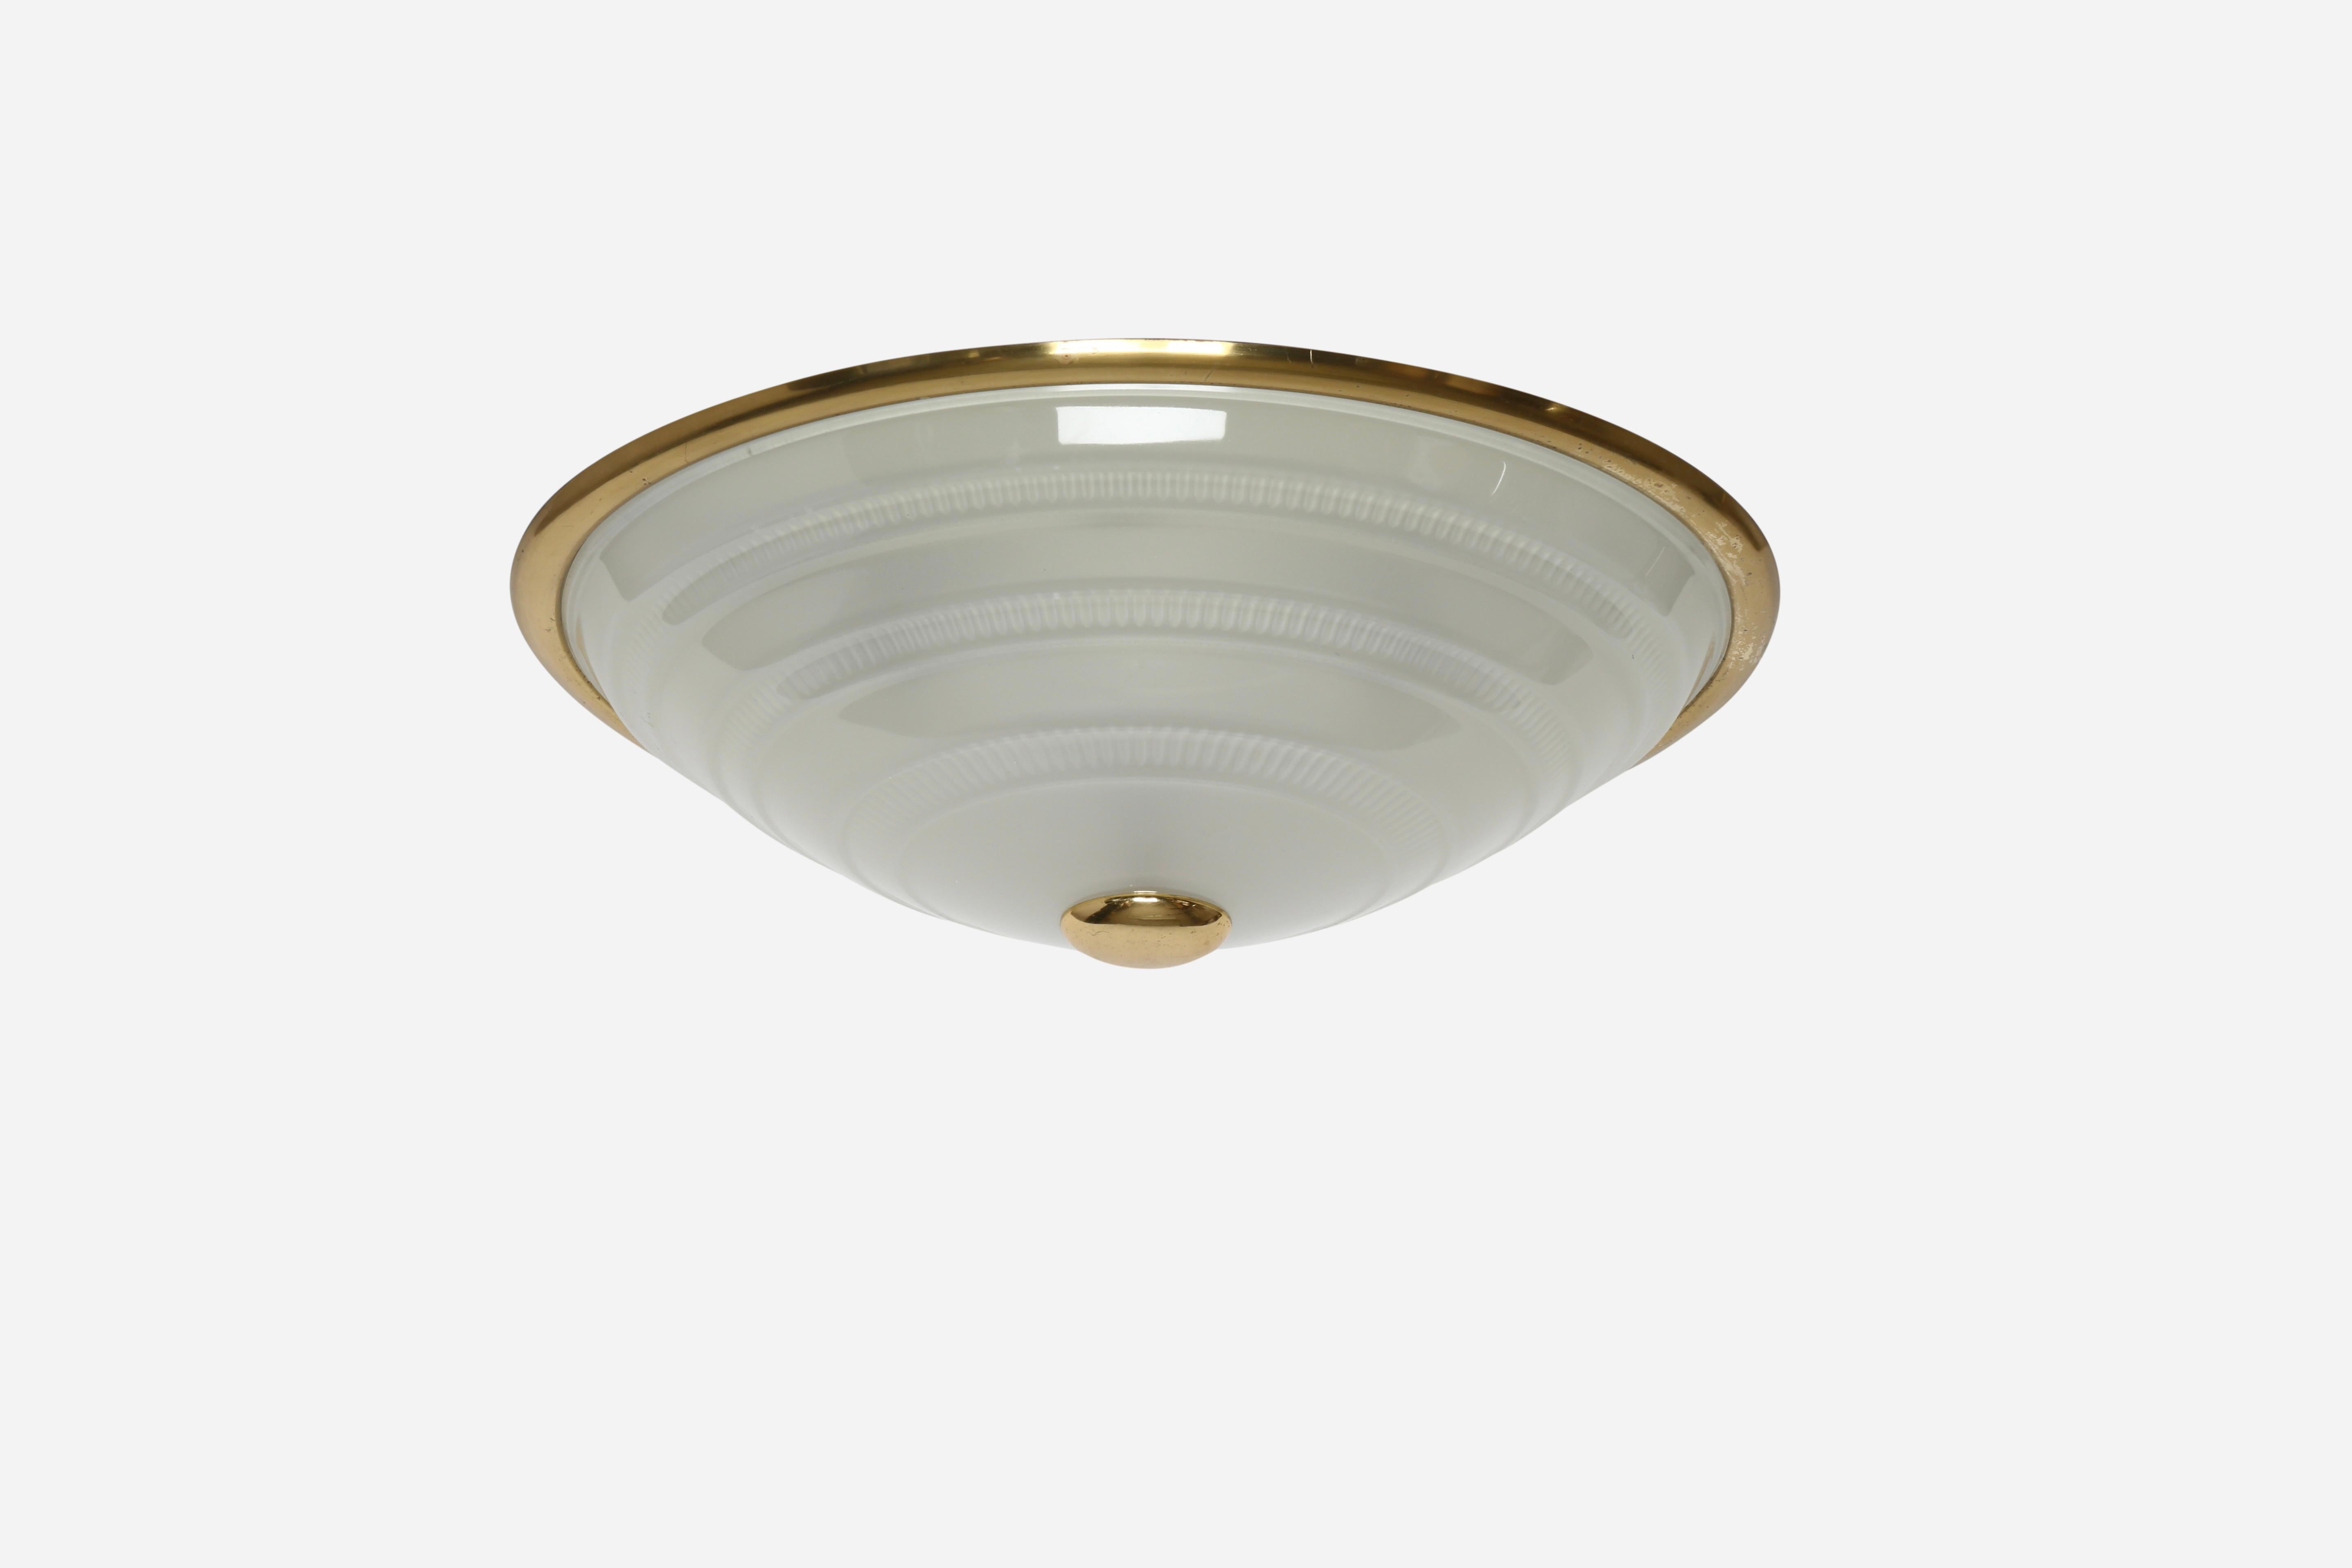 Murano glass Italian flush mount ceiling light
Designed and made in Italy in 1960s.
Textured glass, brass frame.
Takes 4 candelabra bulbs.
Complimentary US rewiring upon request.

At Illustris Lighting our main focus is to deliver lighting fixtures